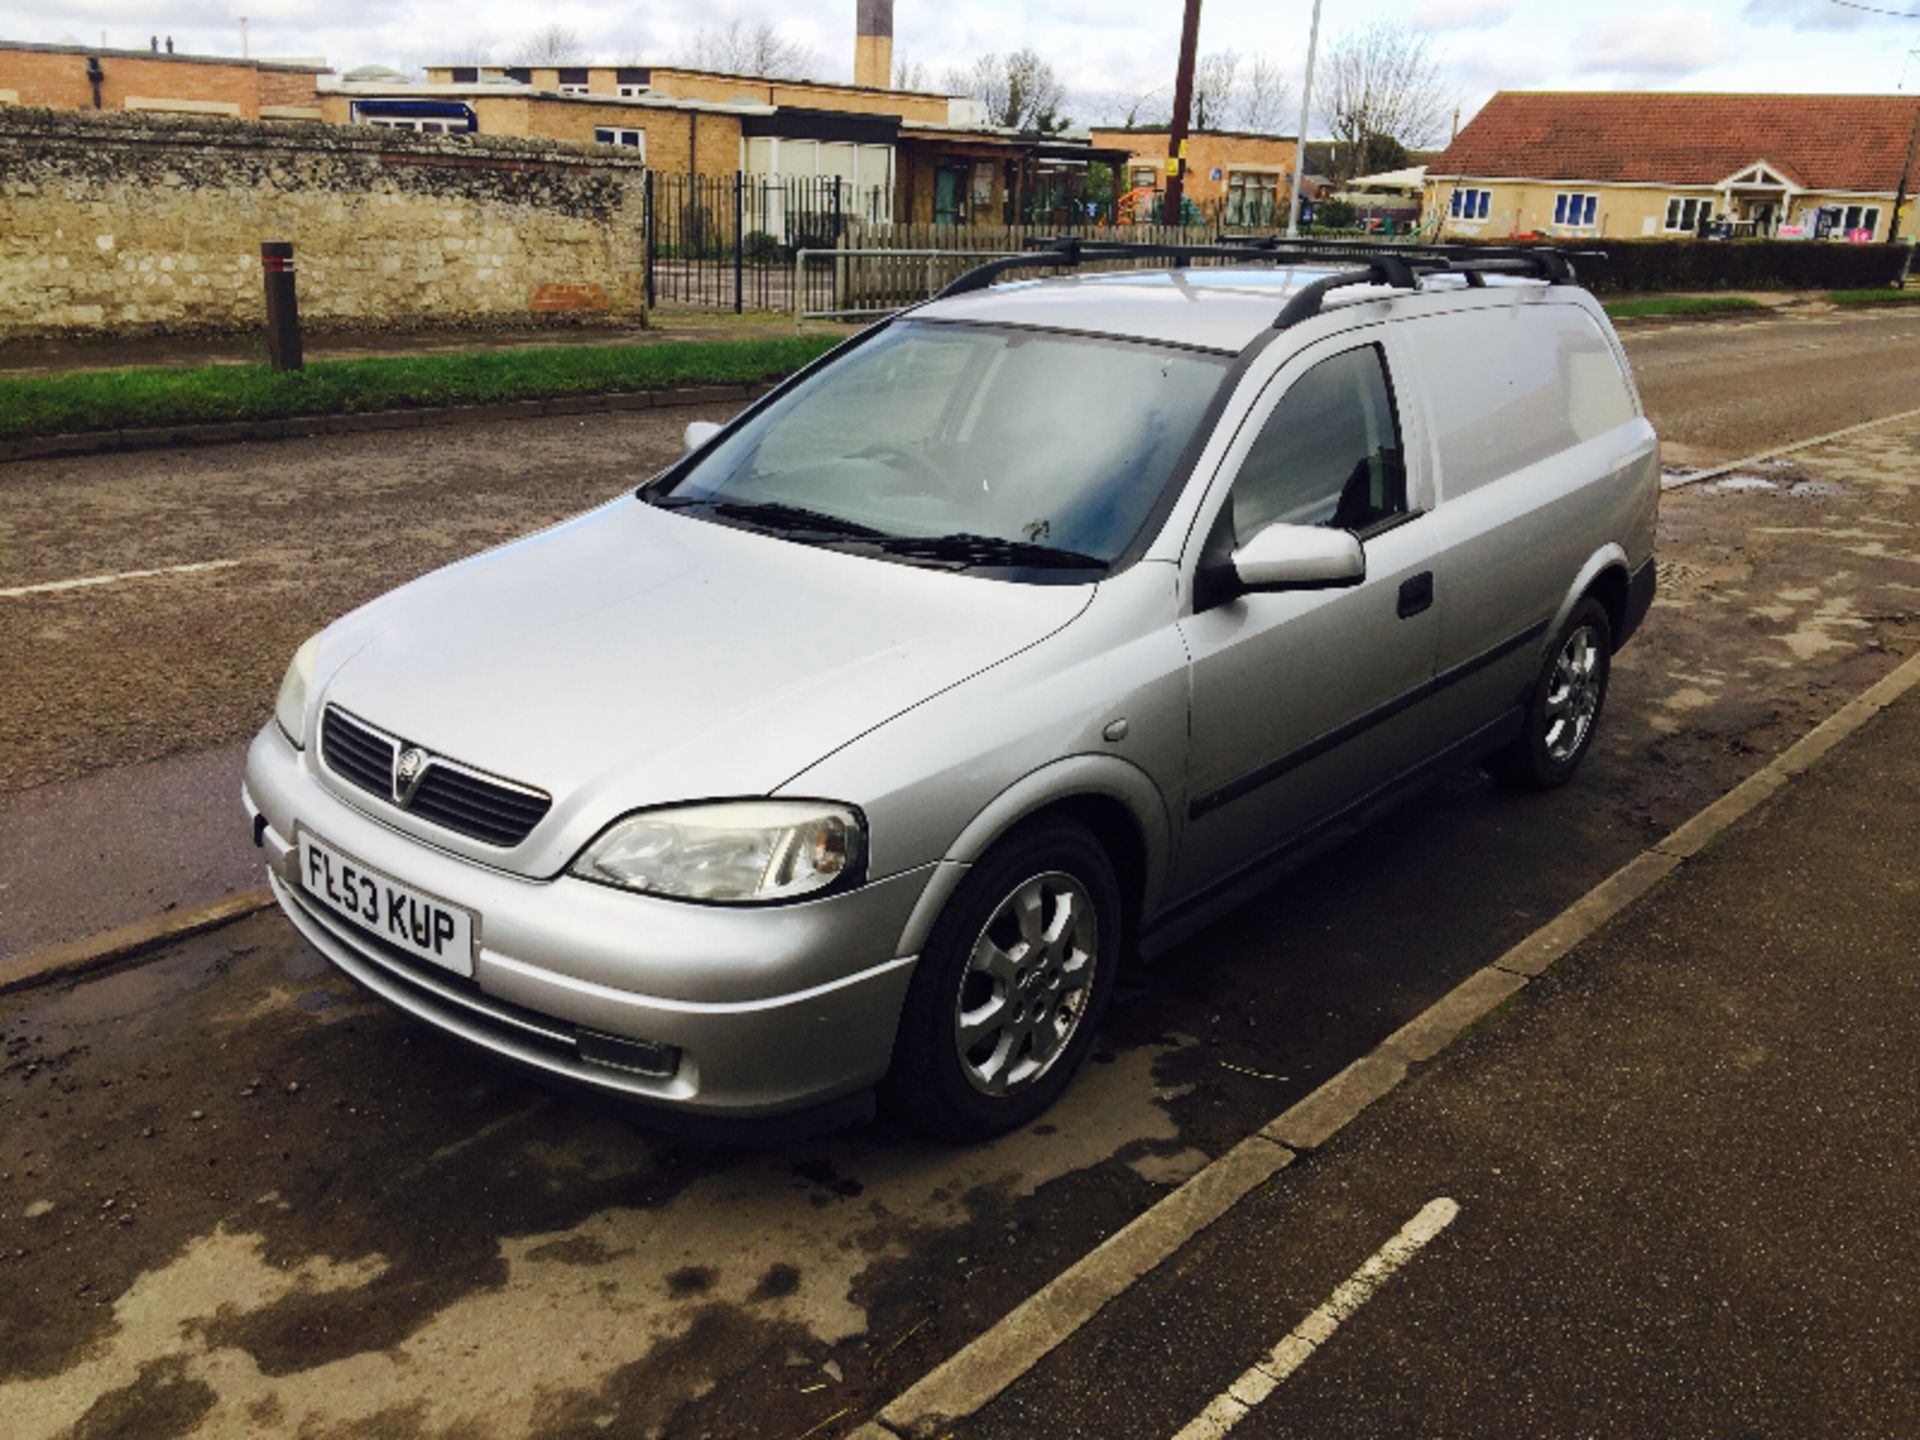 (ON SALE)VAUXHALL ASTRA 2.0 DTI SPORTIVE 2003(53) **METALLIC SILVER**A/C** NO VAT SAVE 20% - Image 6 of 9